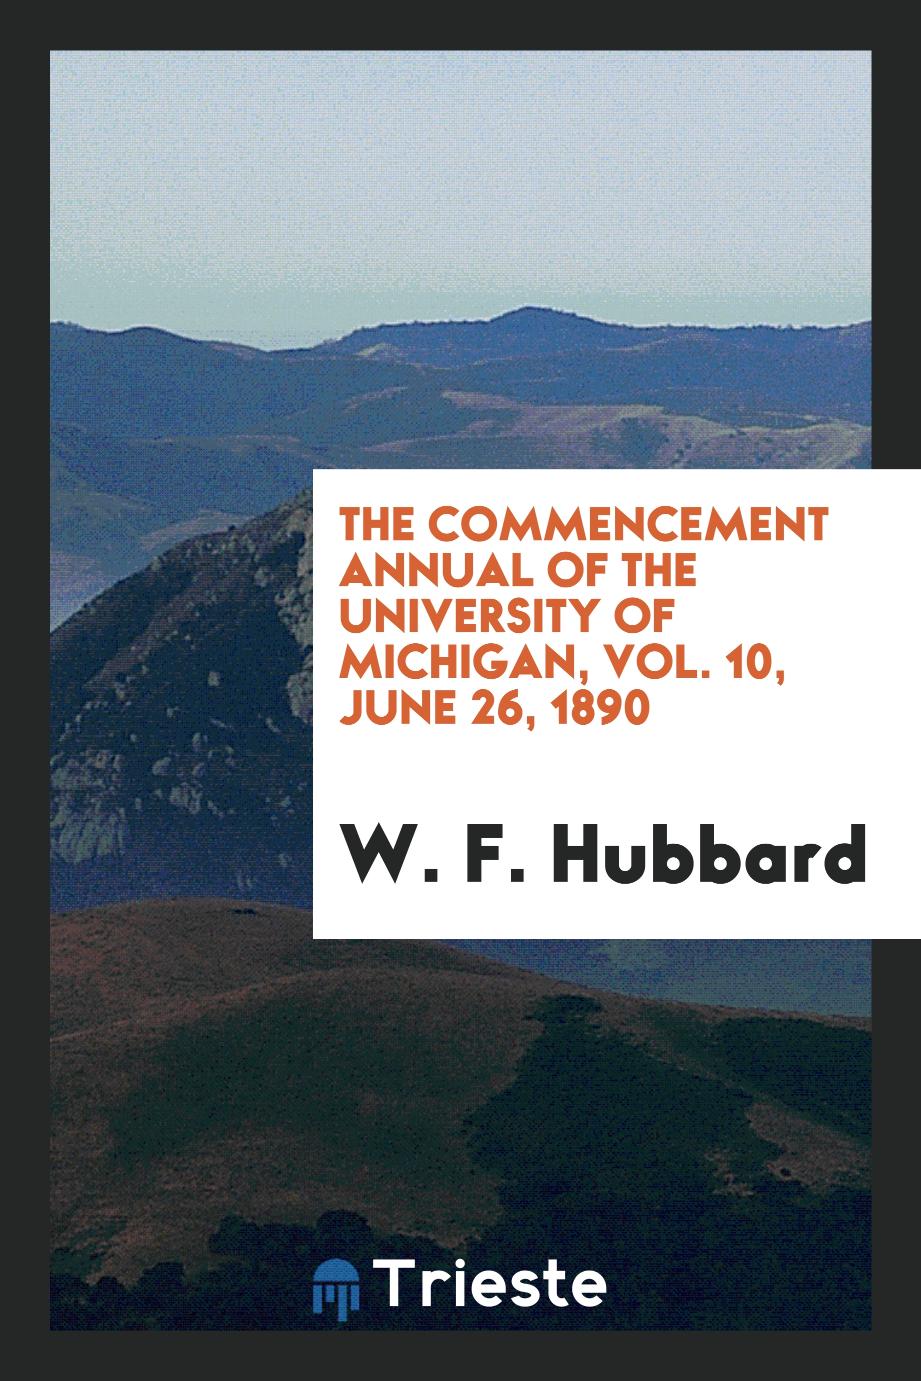 The Commencement Annual of the University of Michigan, Vol. 10, June 26, 1890